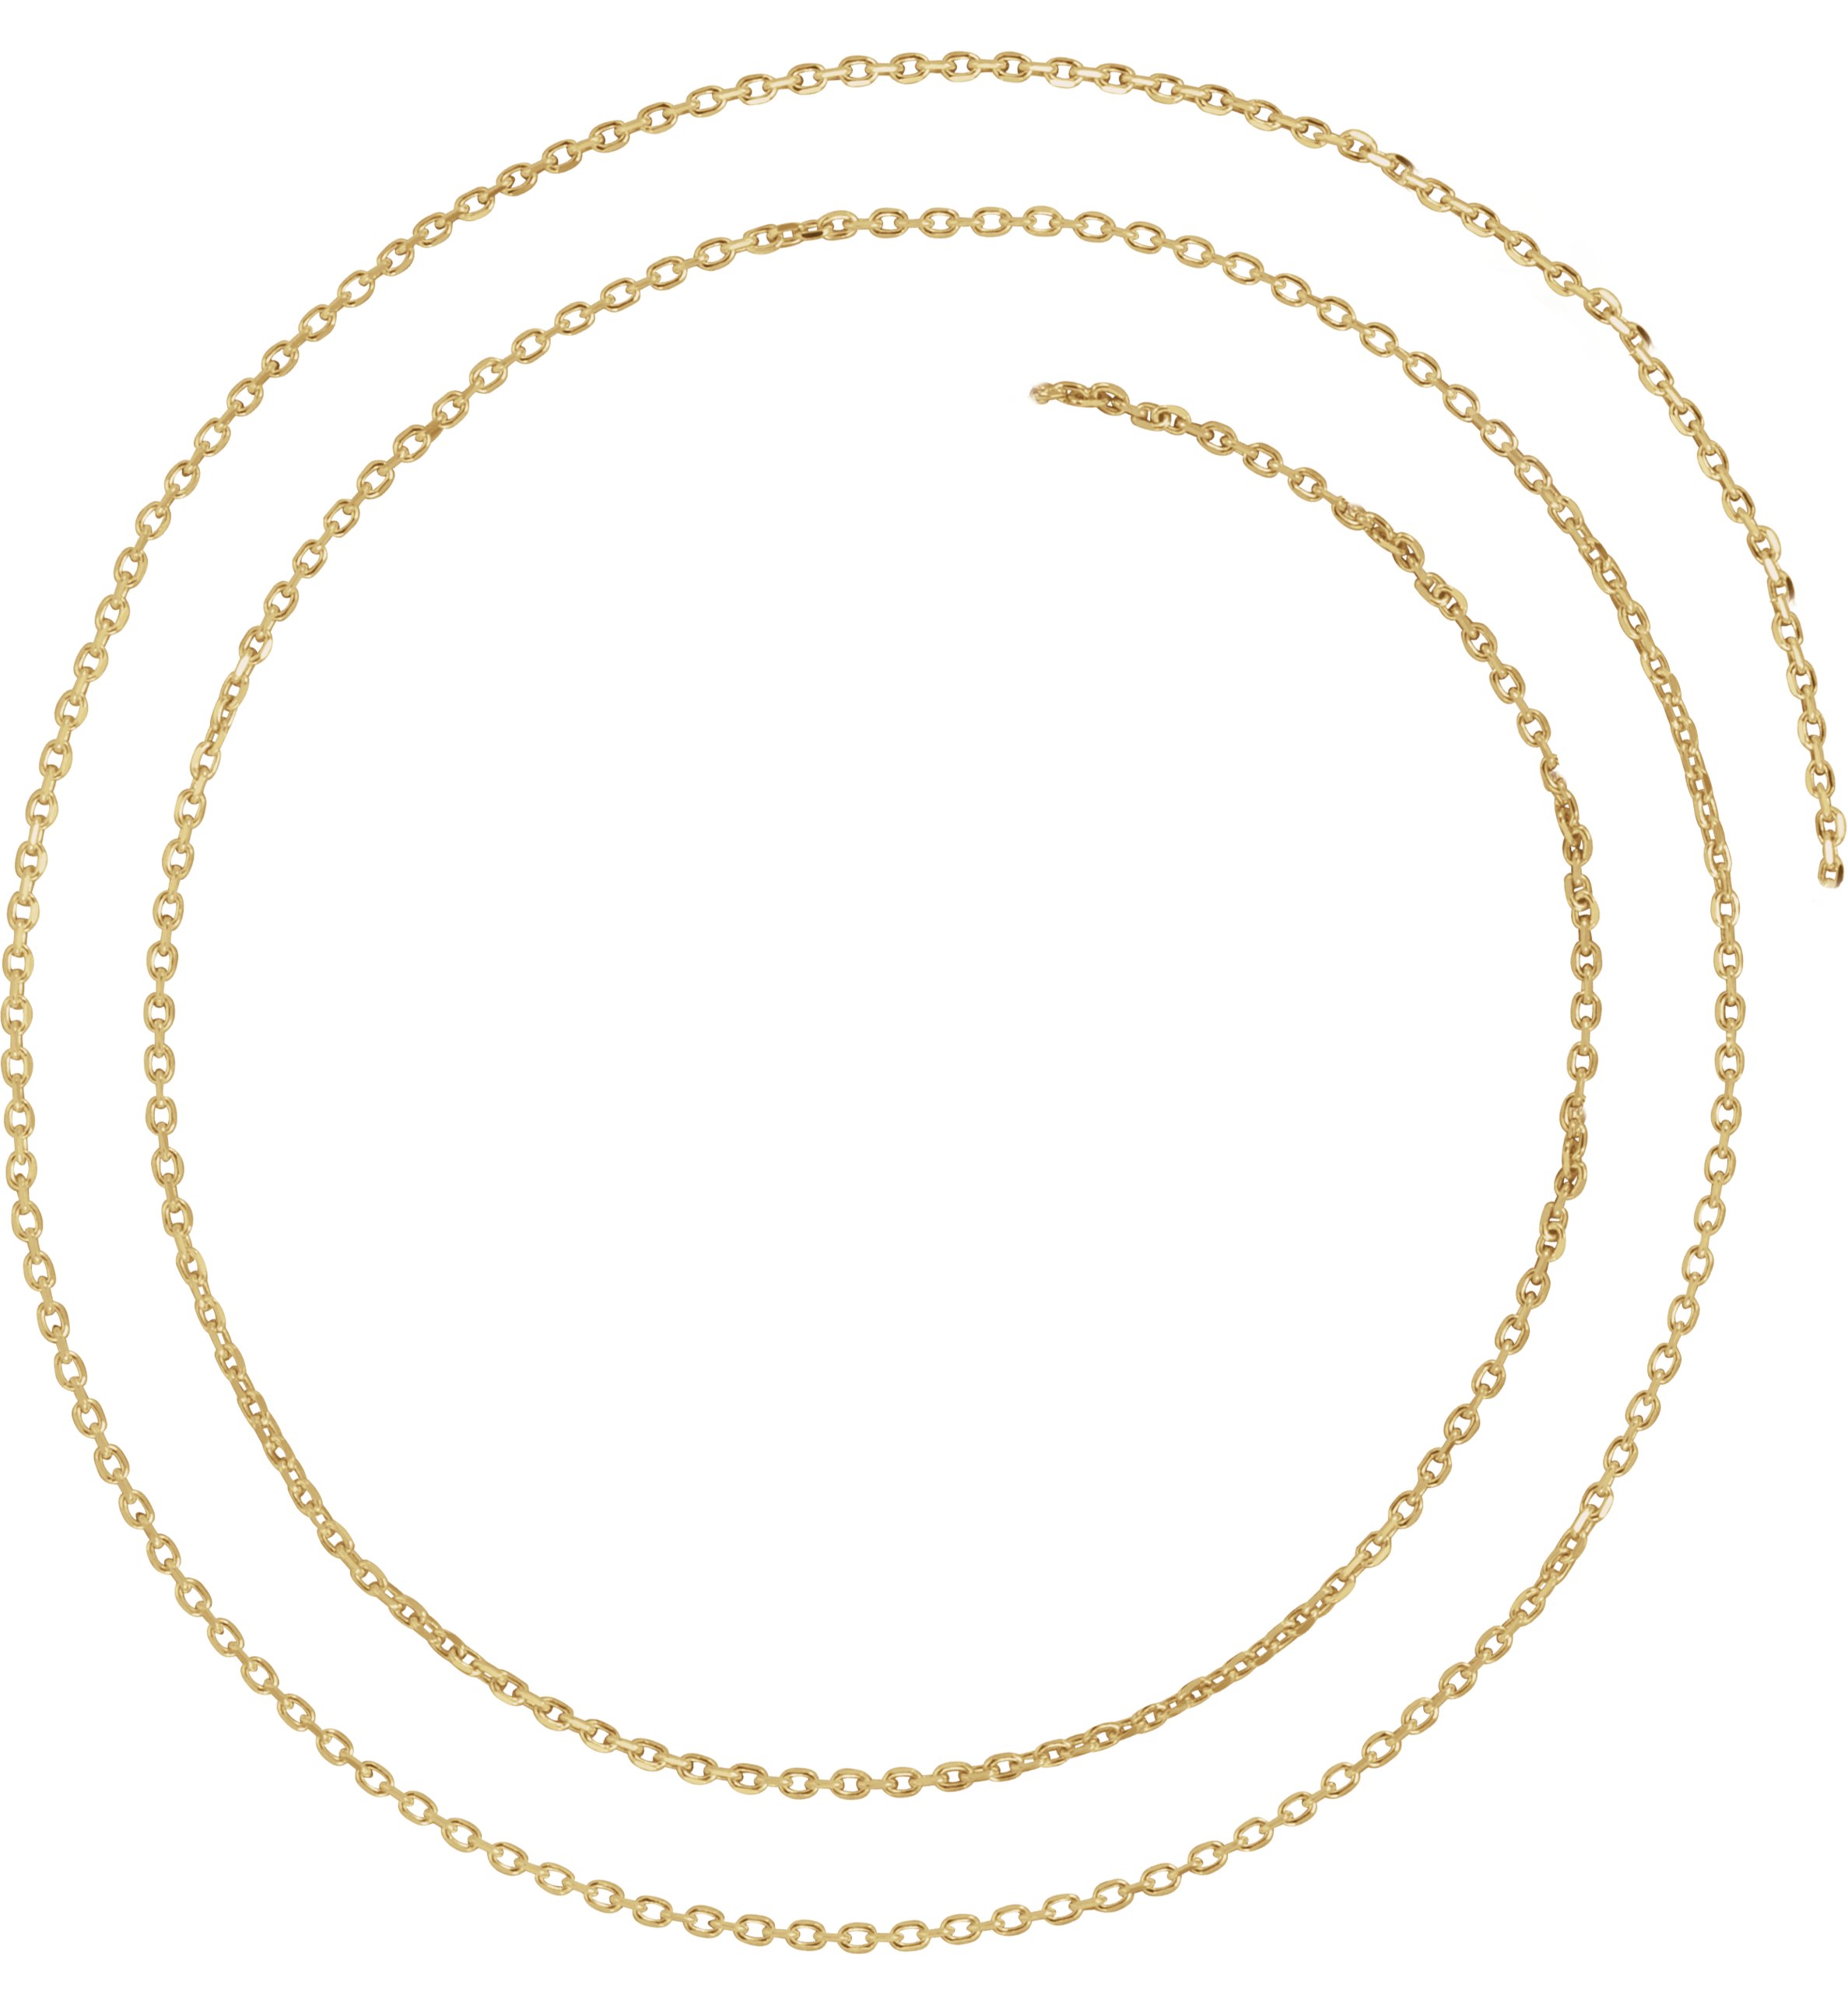 14K Yellow 1.4 mm Diamond Cut Cable 16 inch Chain Ref 9912999